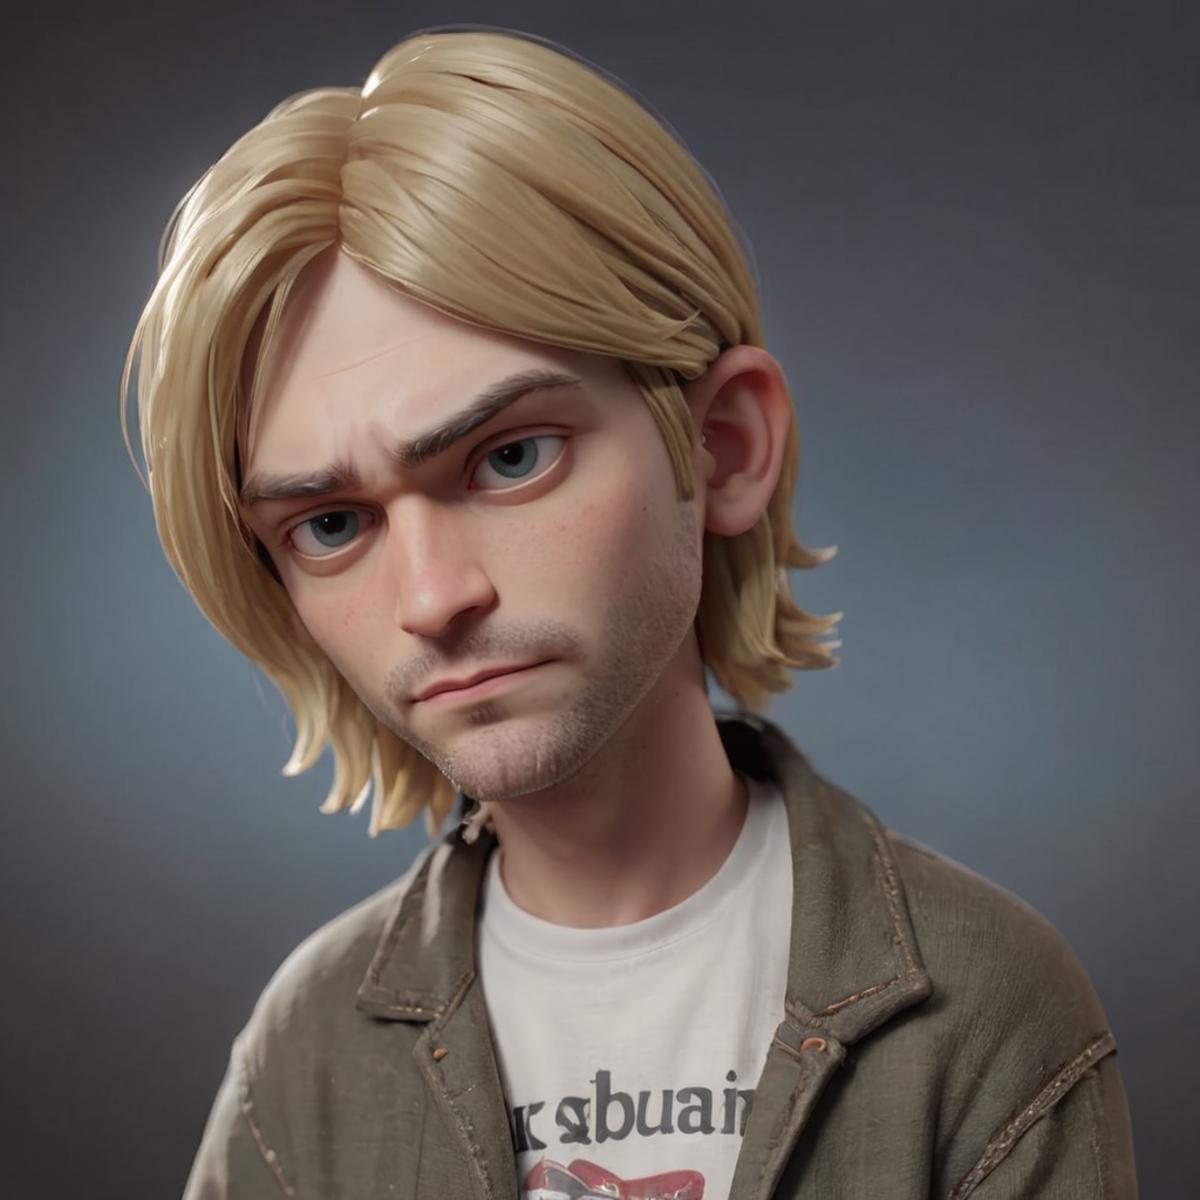 A 3D rendered young man with blond hair and a white shirt.